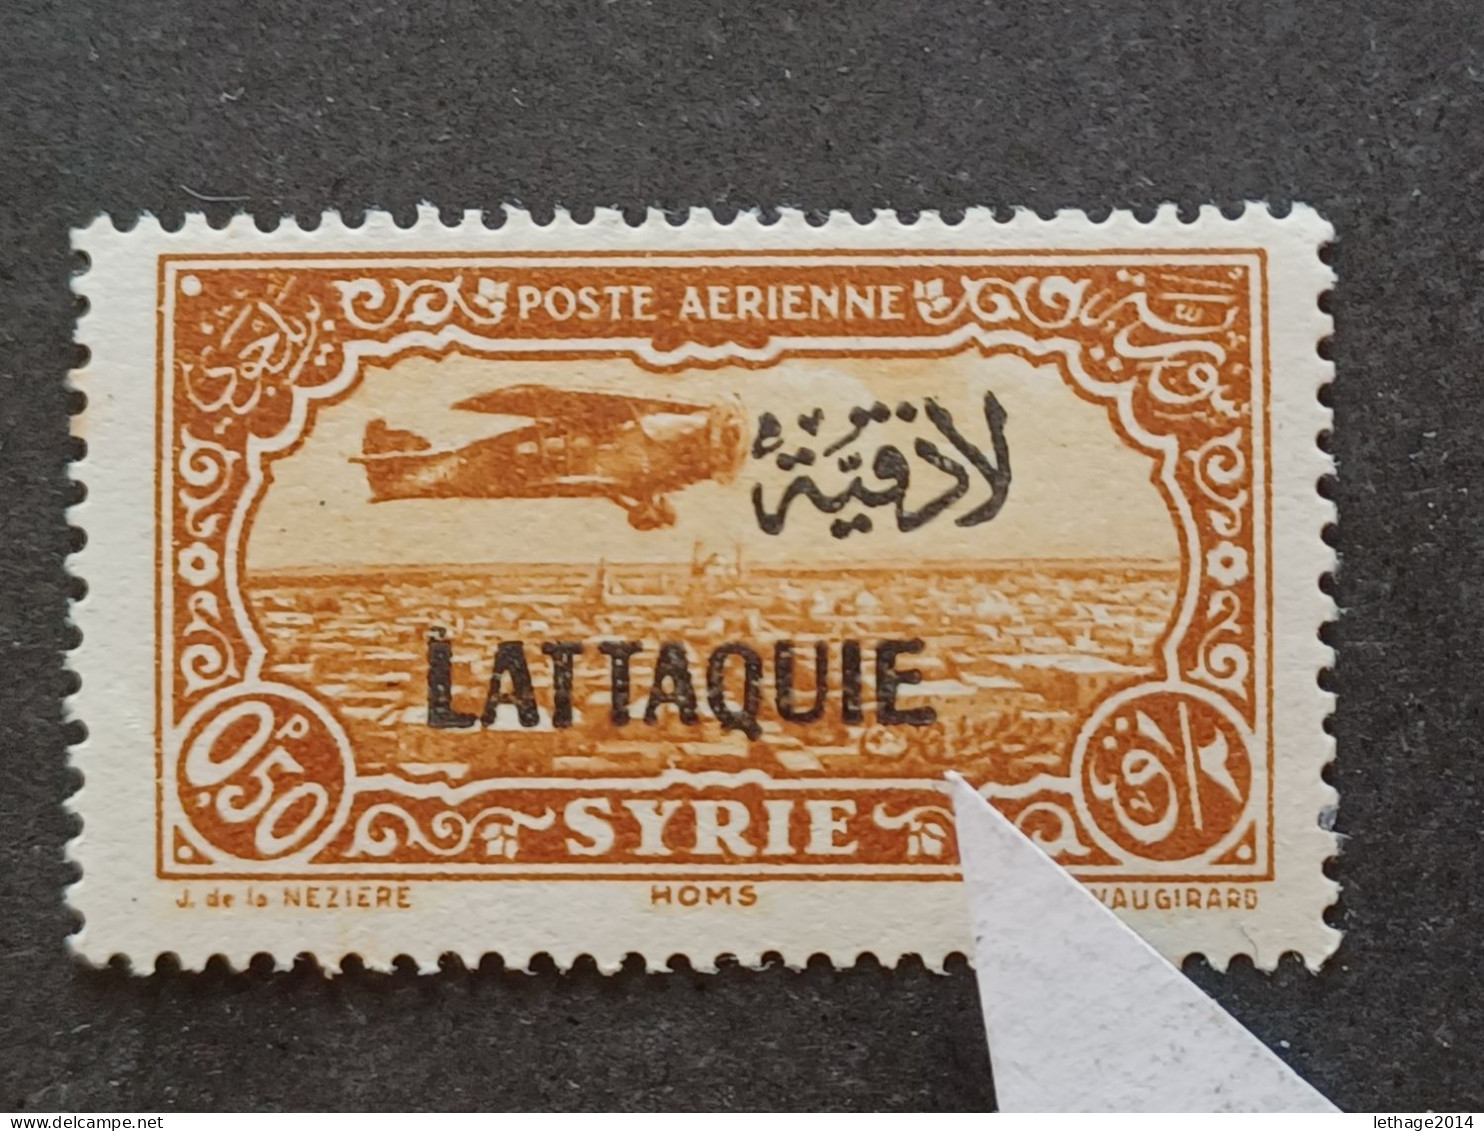 FRENCH OCCUPATION IN SYRIA LATTAQUIE 1940 AIRMAIL STAMPS OF SYRIE DE 1930 IN OVERPRINT CAT YVERT N 1 ERROR E LONG MNH - Used Stamps